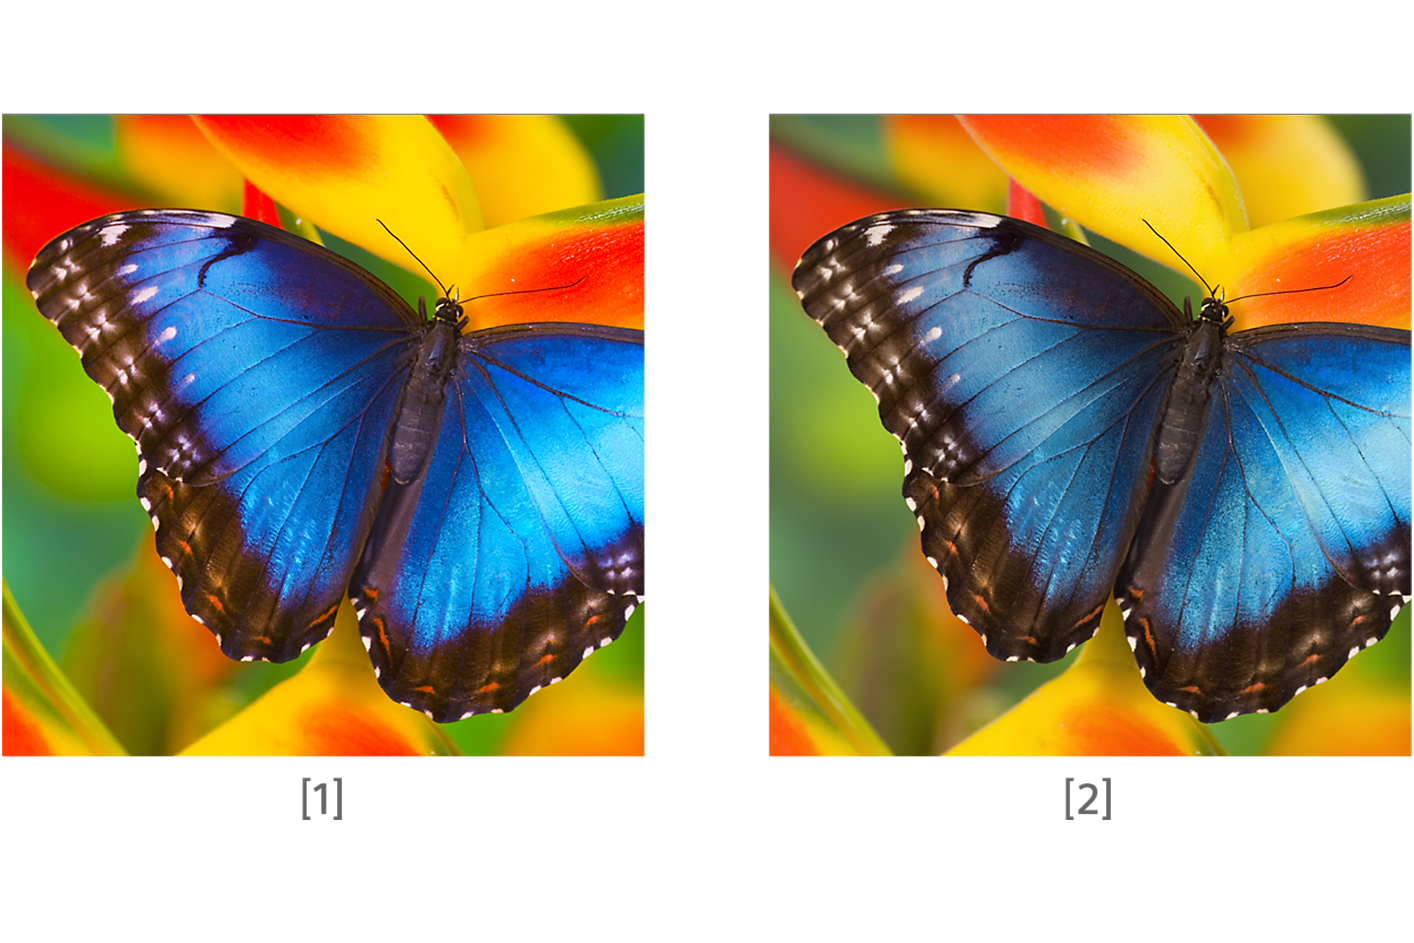 Two images of a butterfly, each showing different colour reproduction